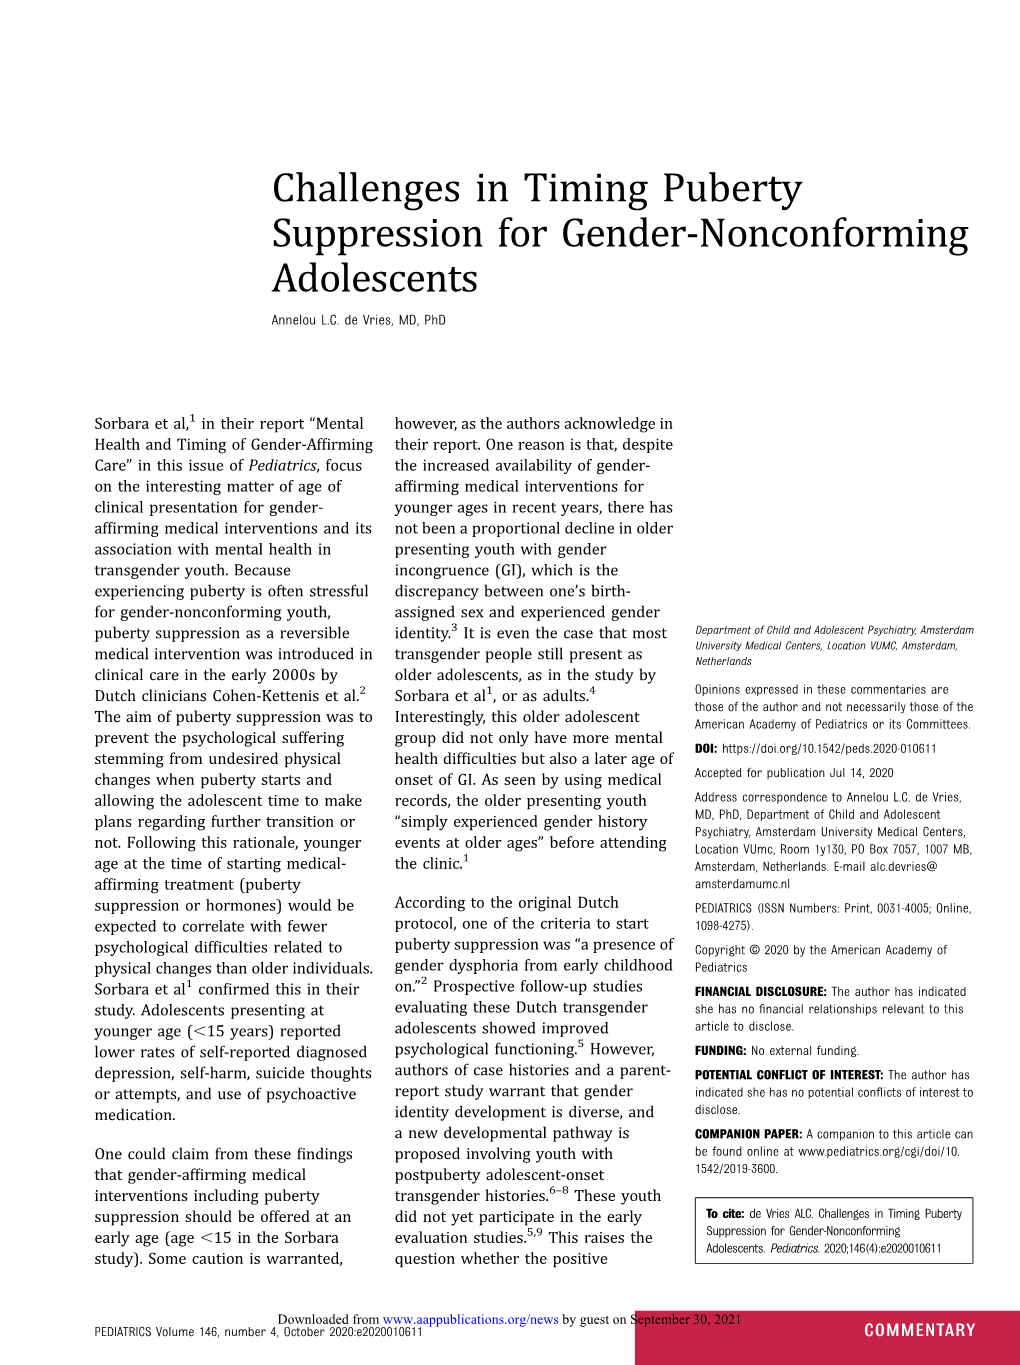 Challenges in Timing Puberty Suppression for Gender-Nonconforming Adolescents Annelou L.C